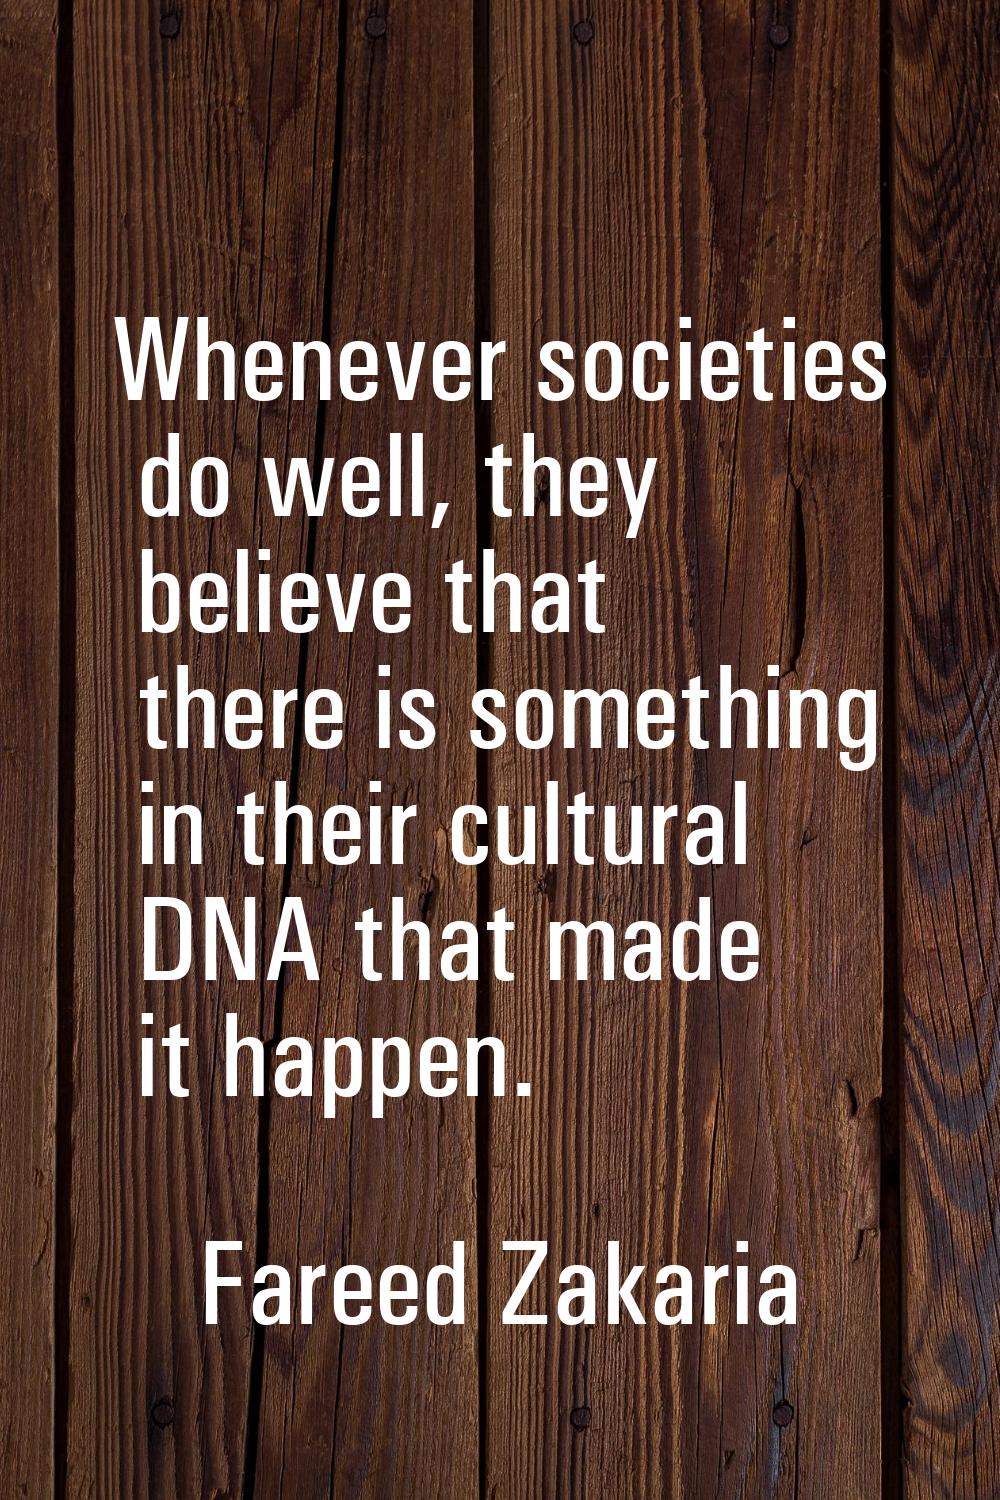 Whenever societies do well, they believe that there is something in their cultural DNA that made it